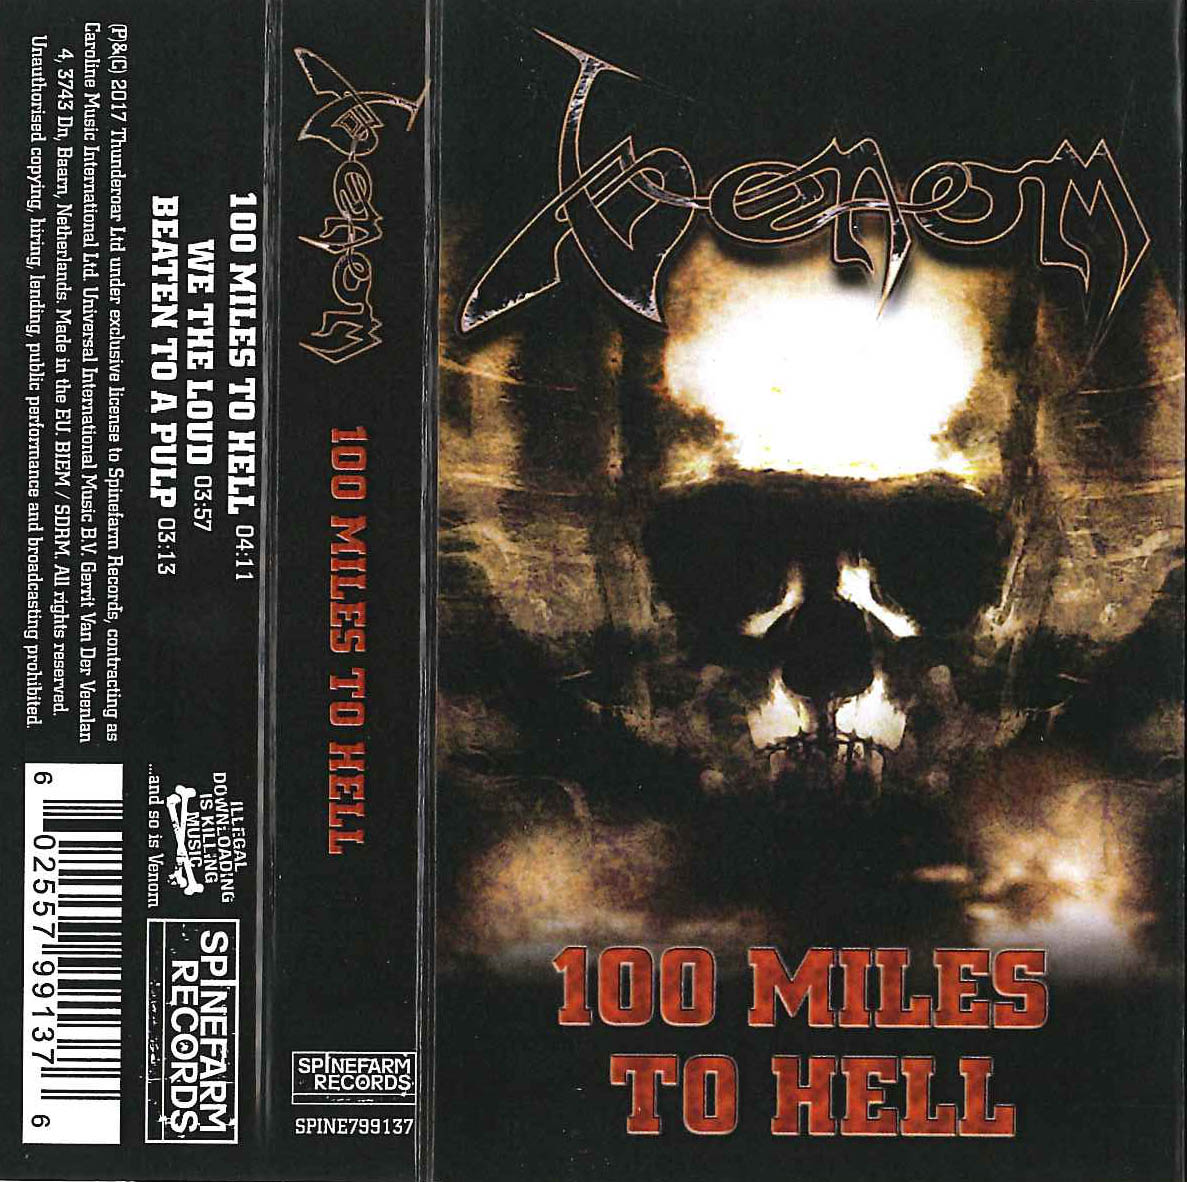 Venom Tapes Collection 100 miles to hell